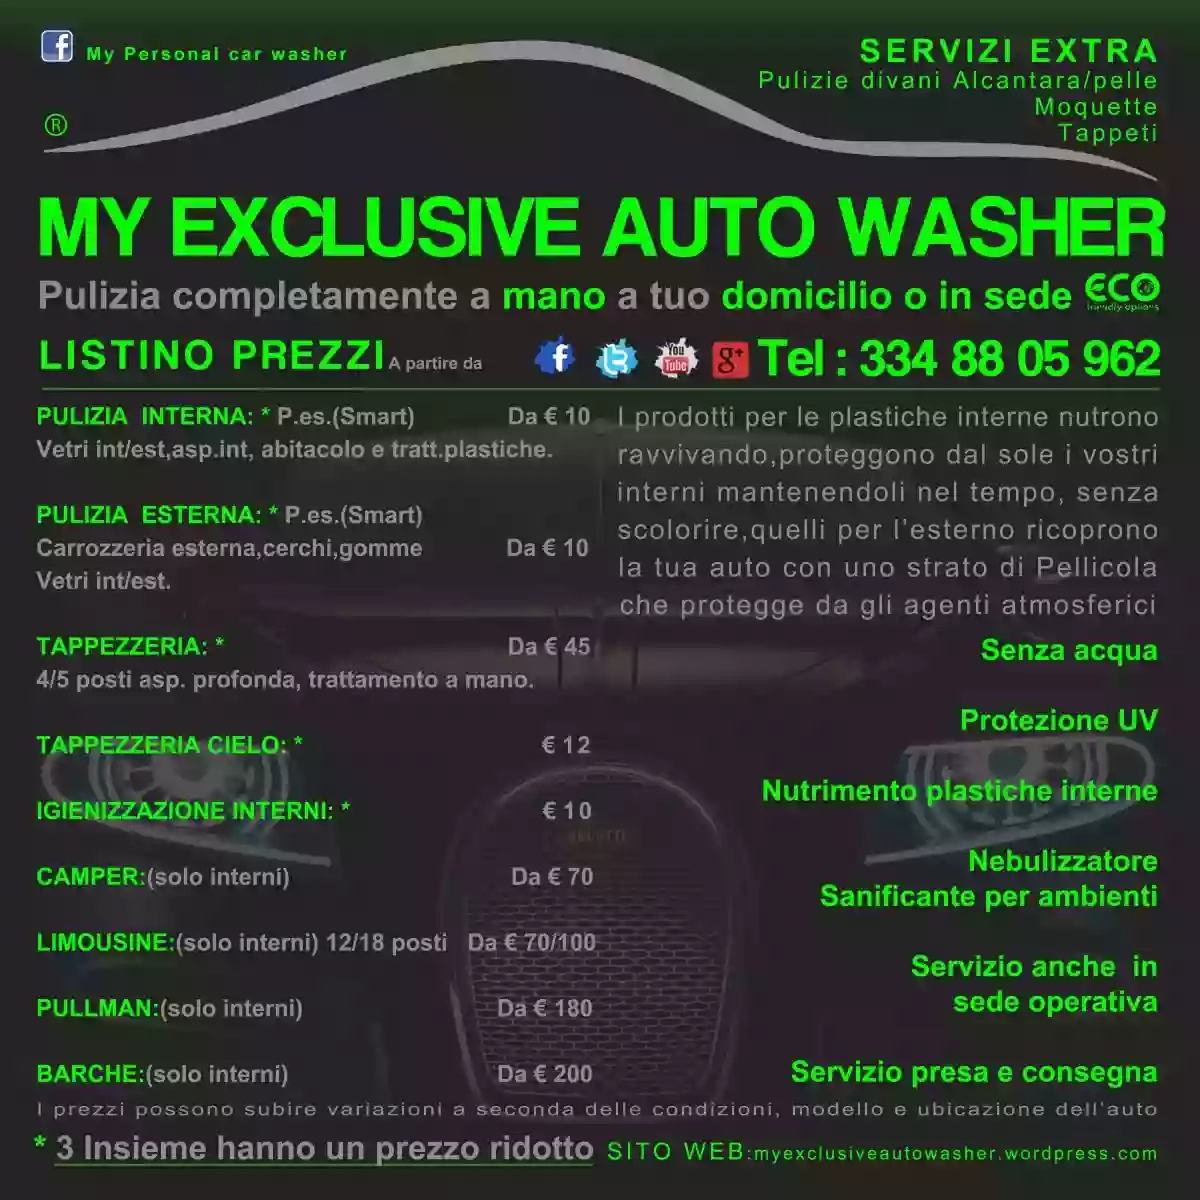 My exclusive Auto Washer